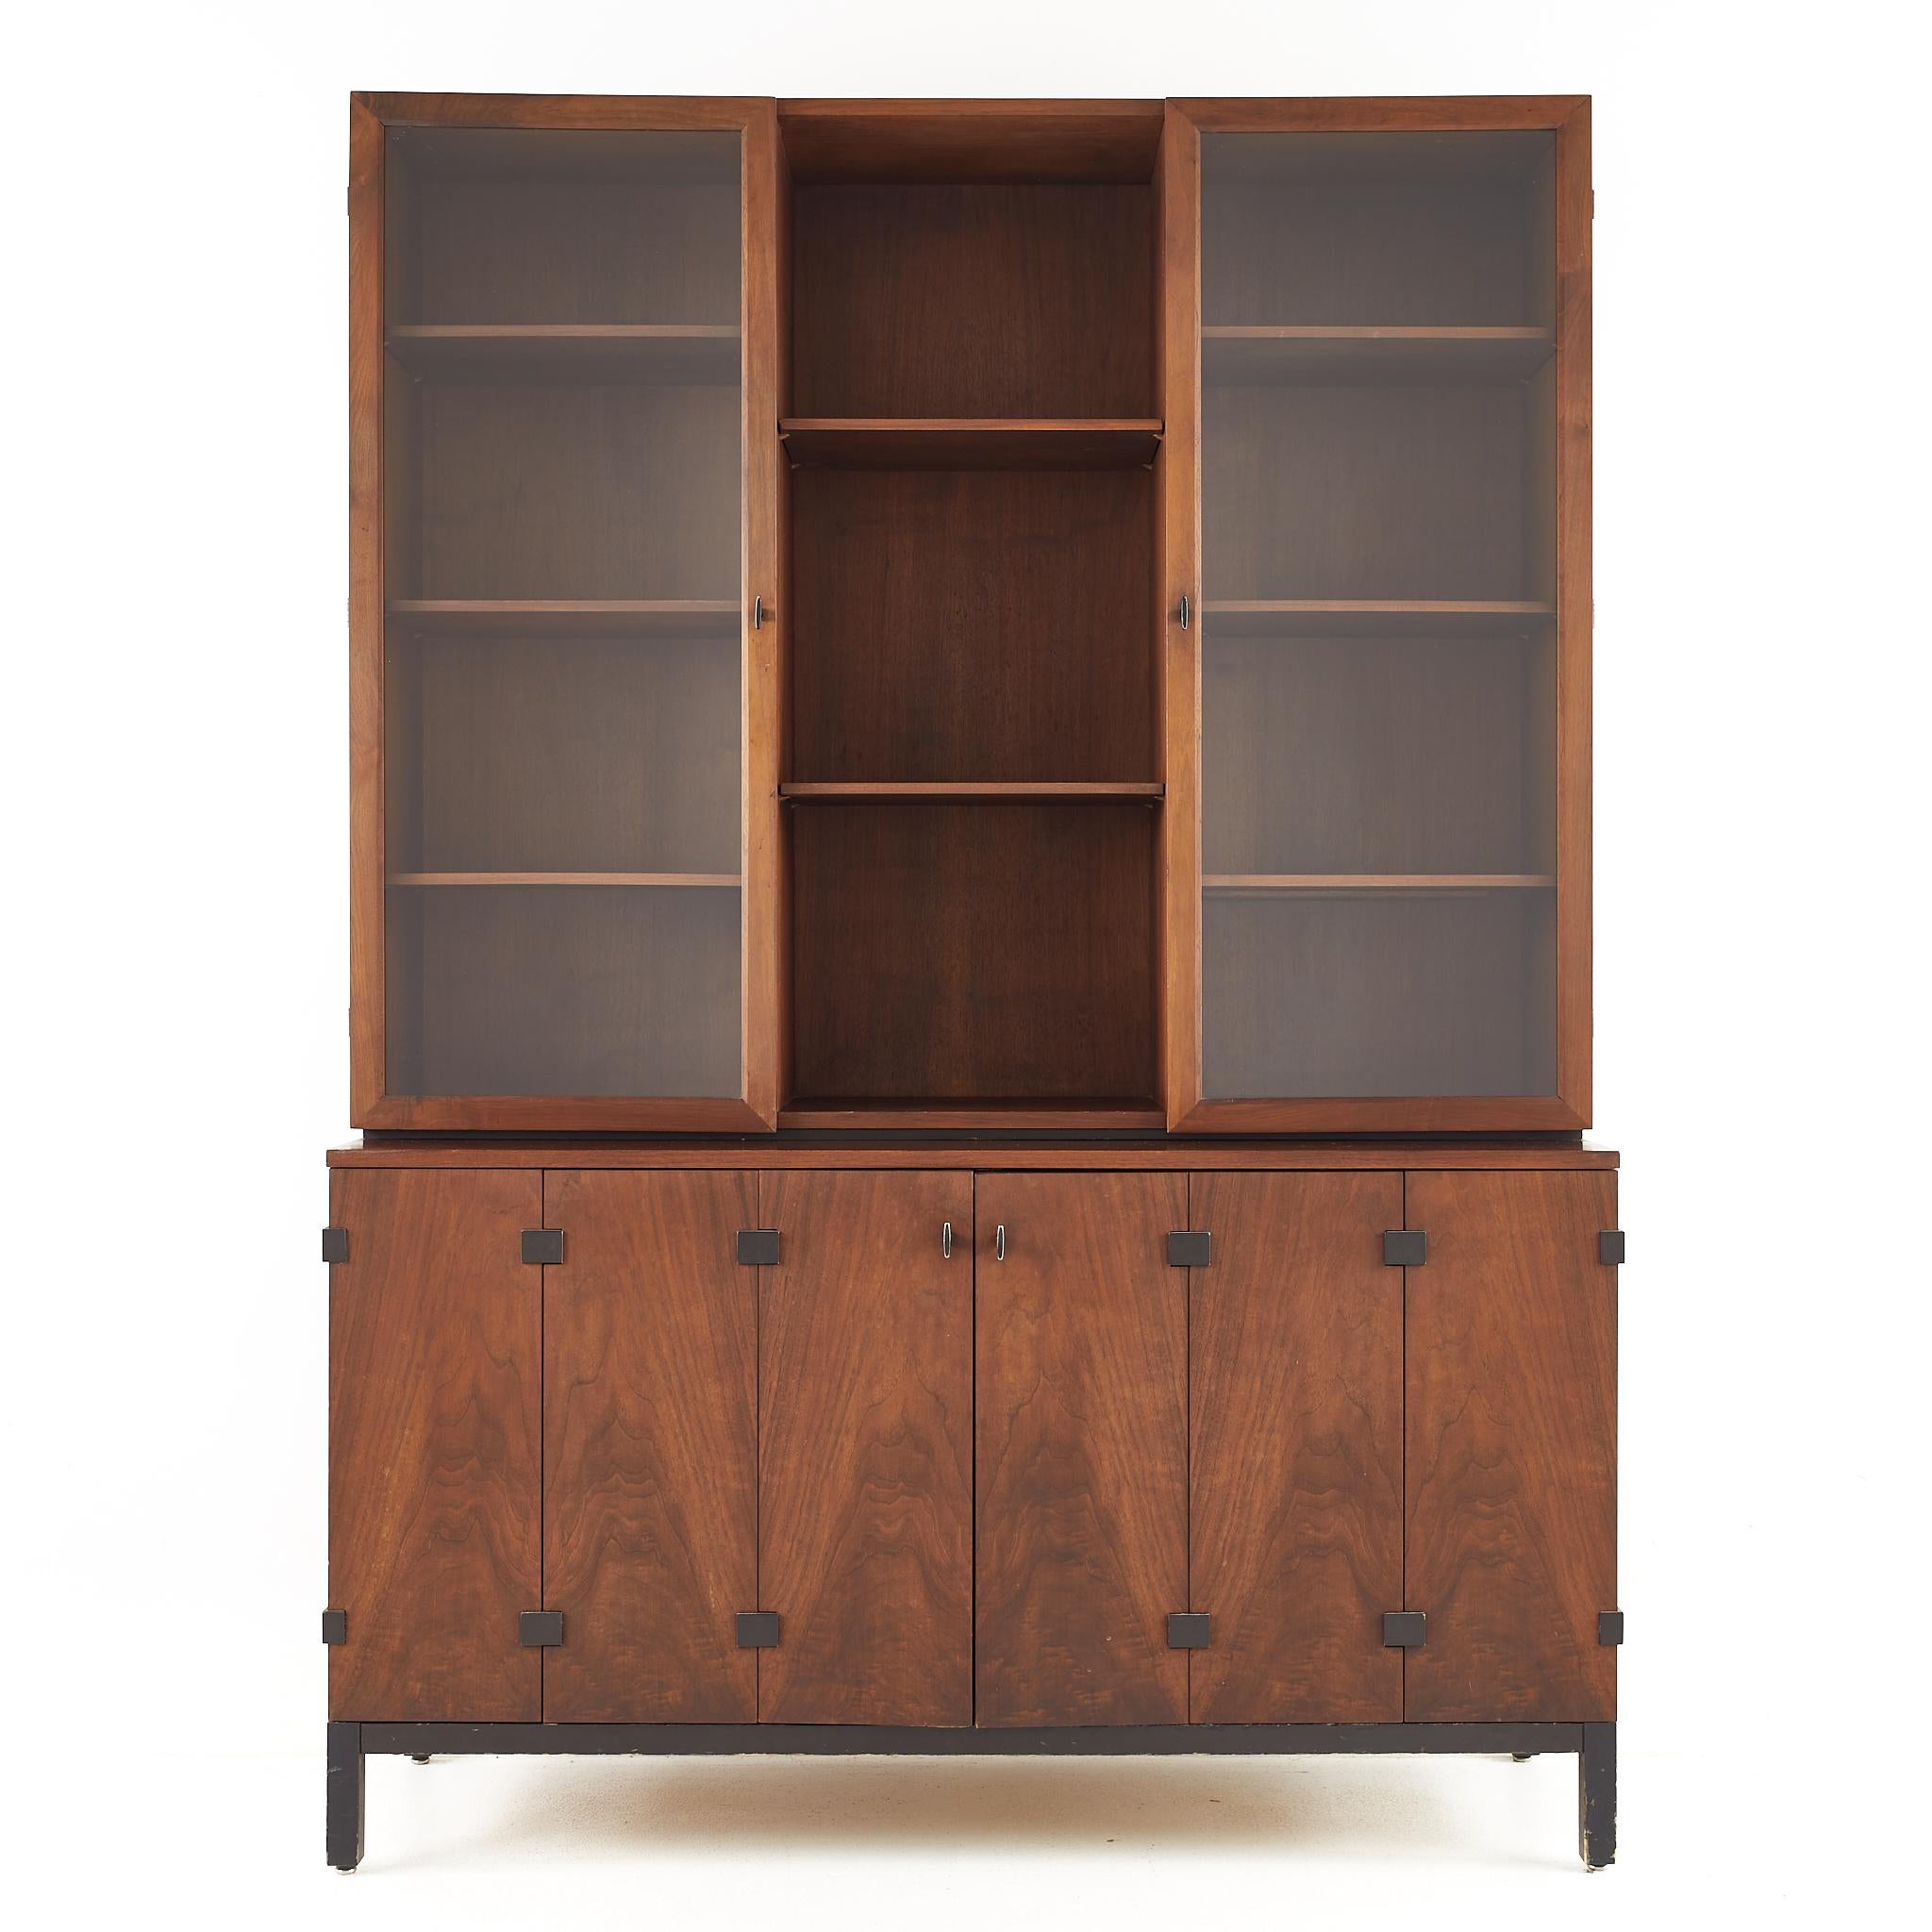 Milo Baughman for Directional mid century sideboard credenza buffet and hutch

The credenza measures: 54.25 wide x 18.25 deep x 30 inches high
The hutch measures: 54.25 wide x 13 deep x 45 inches high (with a combined height of 75 inches)

All